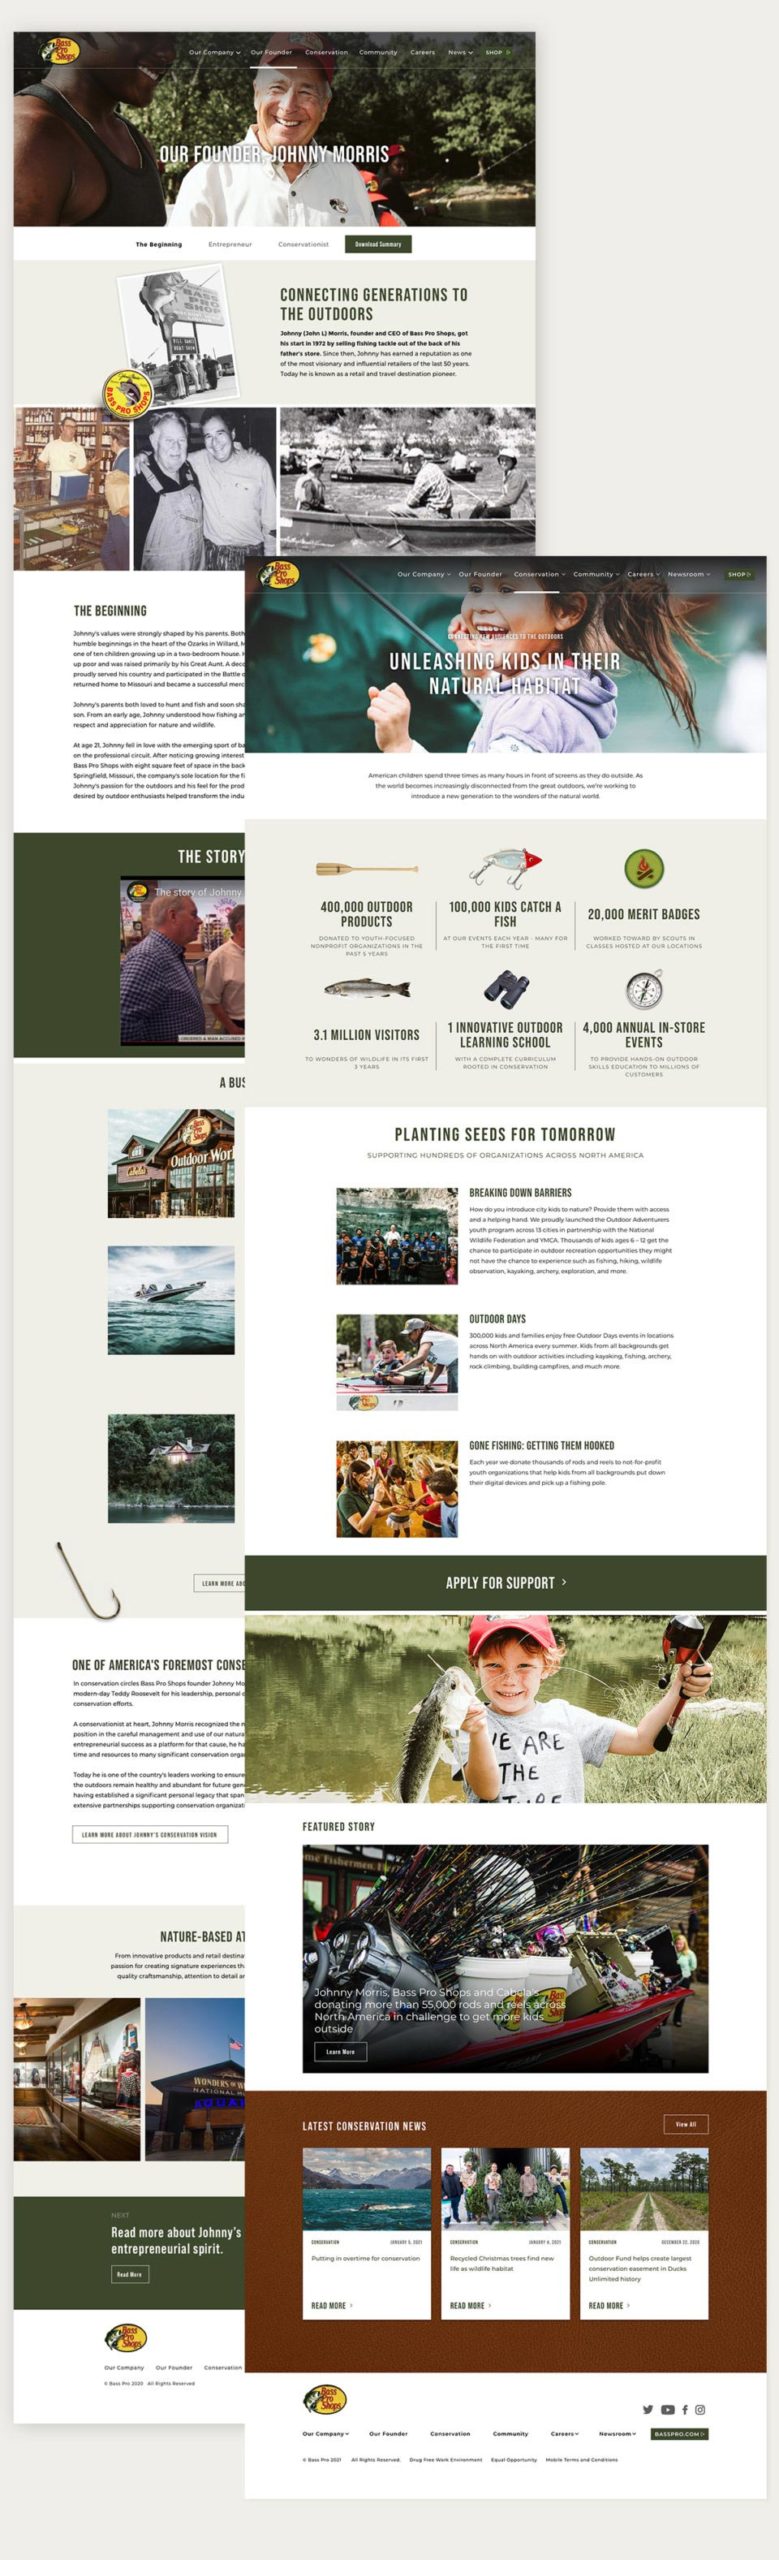 Interior pages from the Bass Pro Shops web design brand section